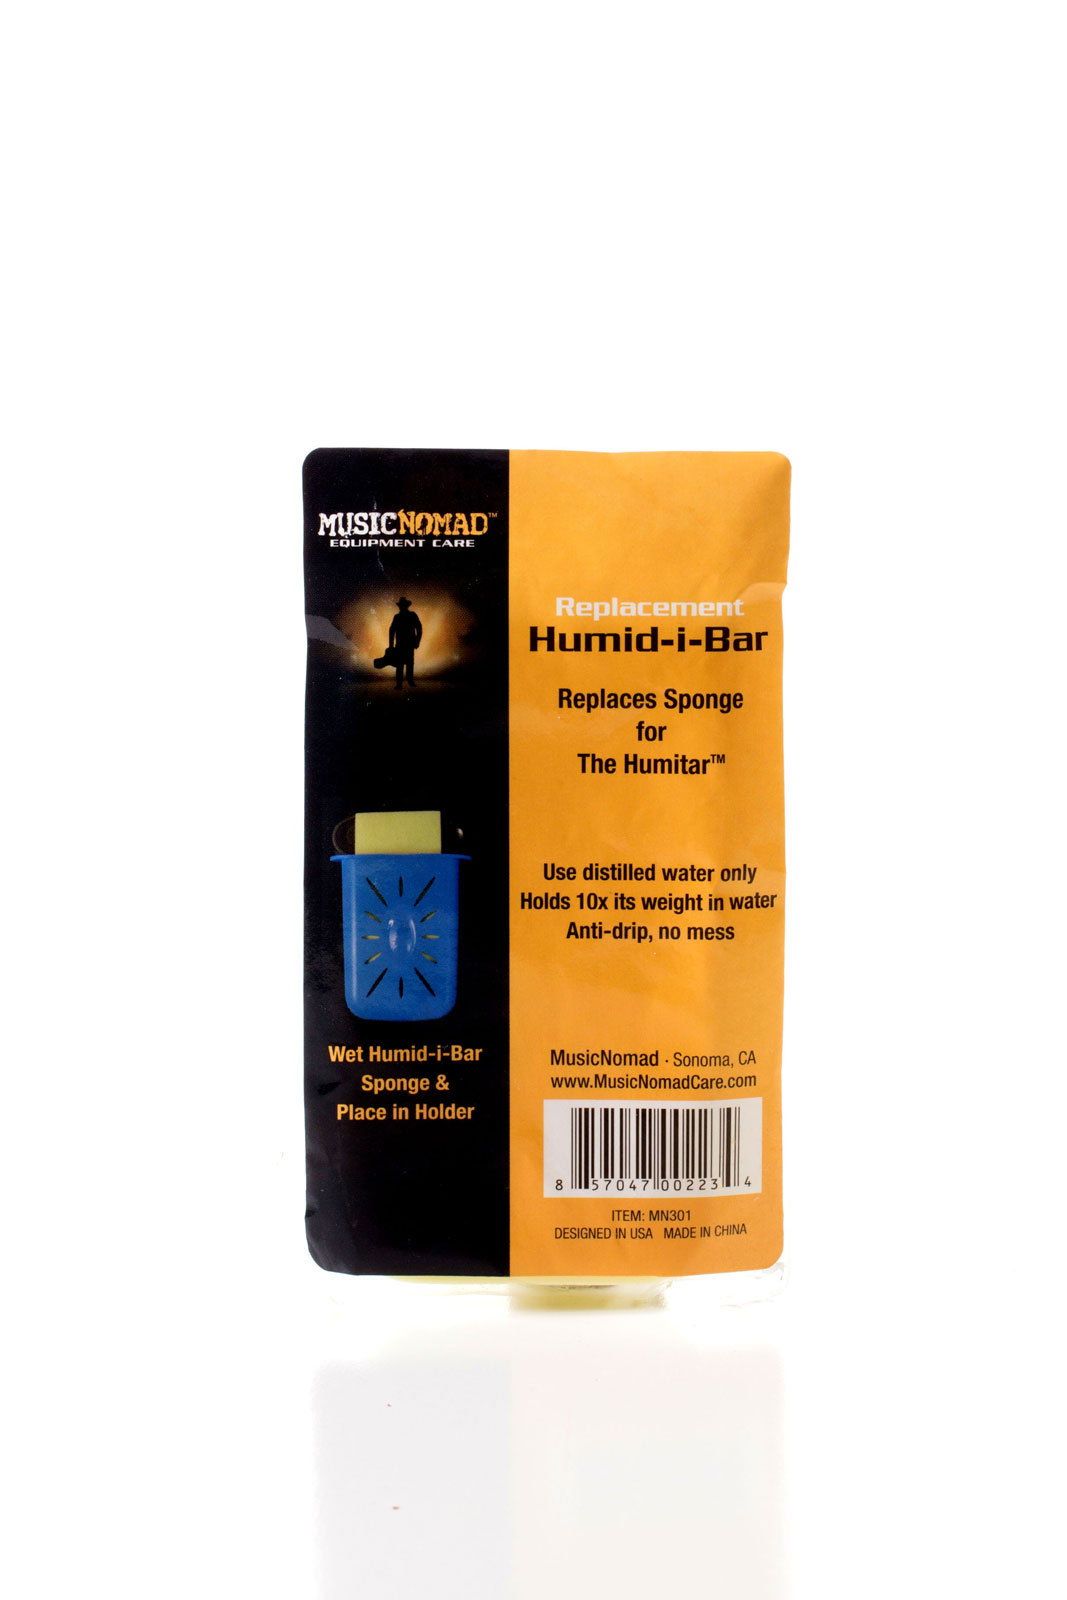 MUSICNOMAD MN301 HUMID-I-BAR REPLACEMENT SPONGE FOR MN300